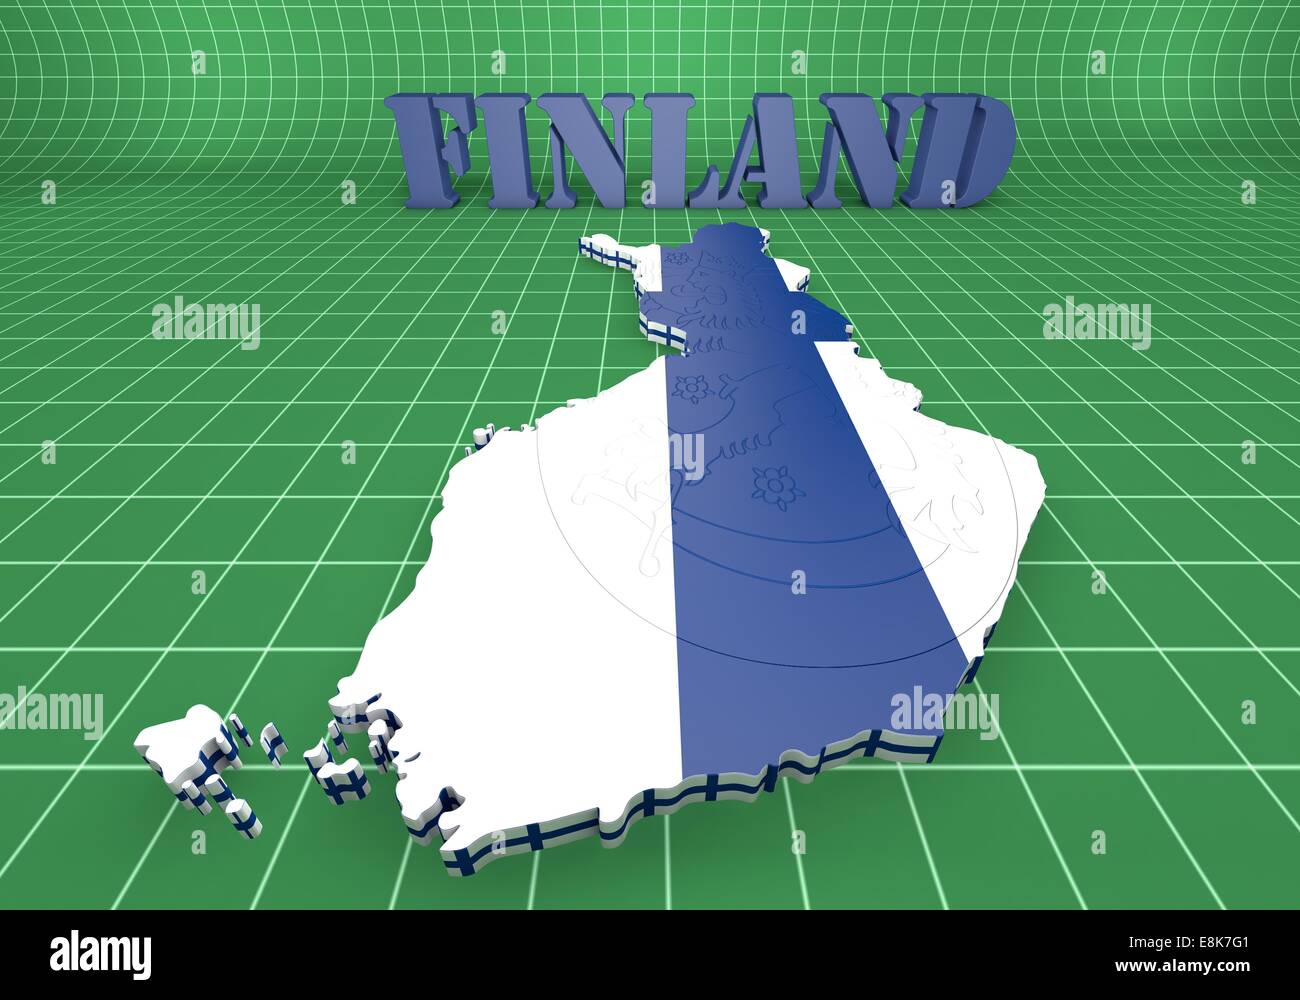 3D map illustratin of Finland with flag and coat of arms Stock Photo